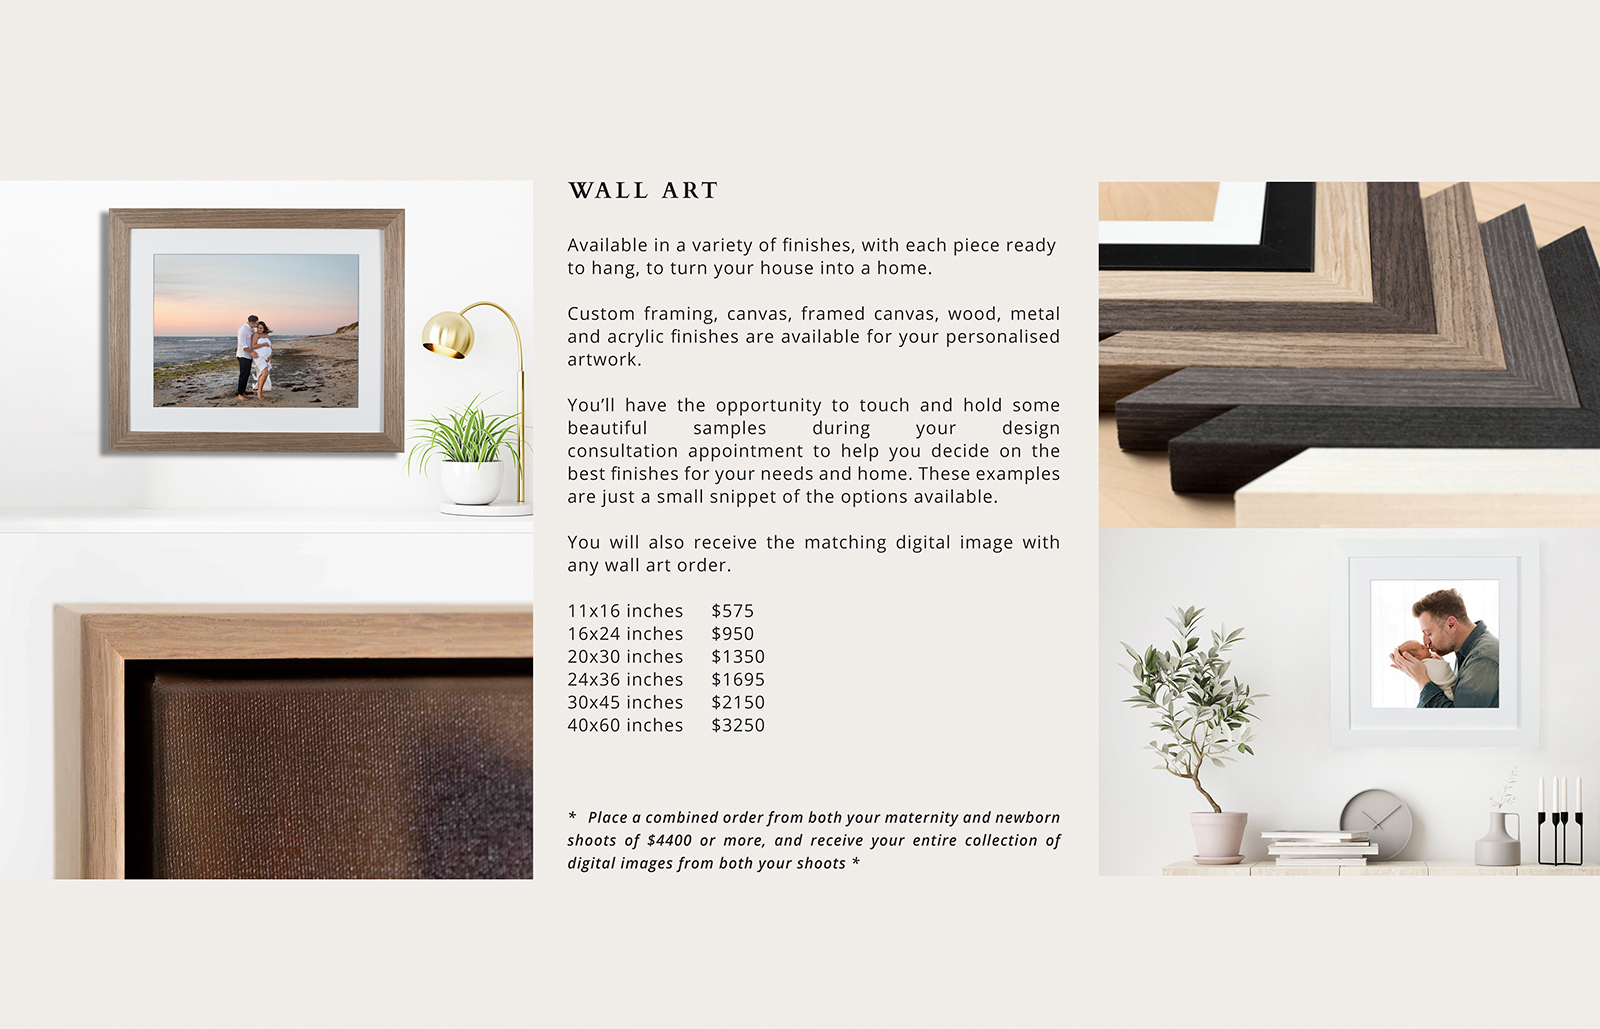 07 - WALL ART PRICING PAGE